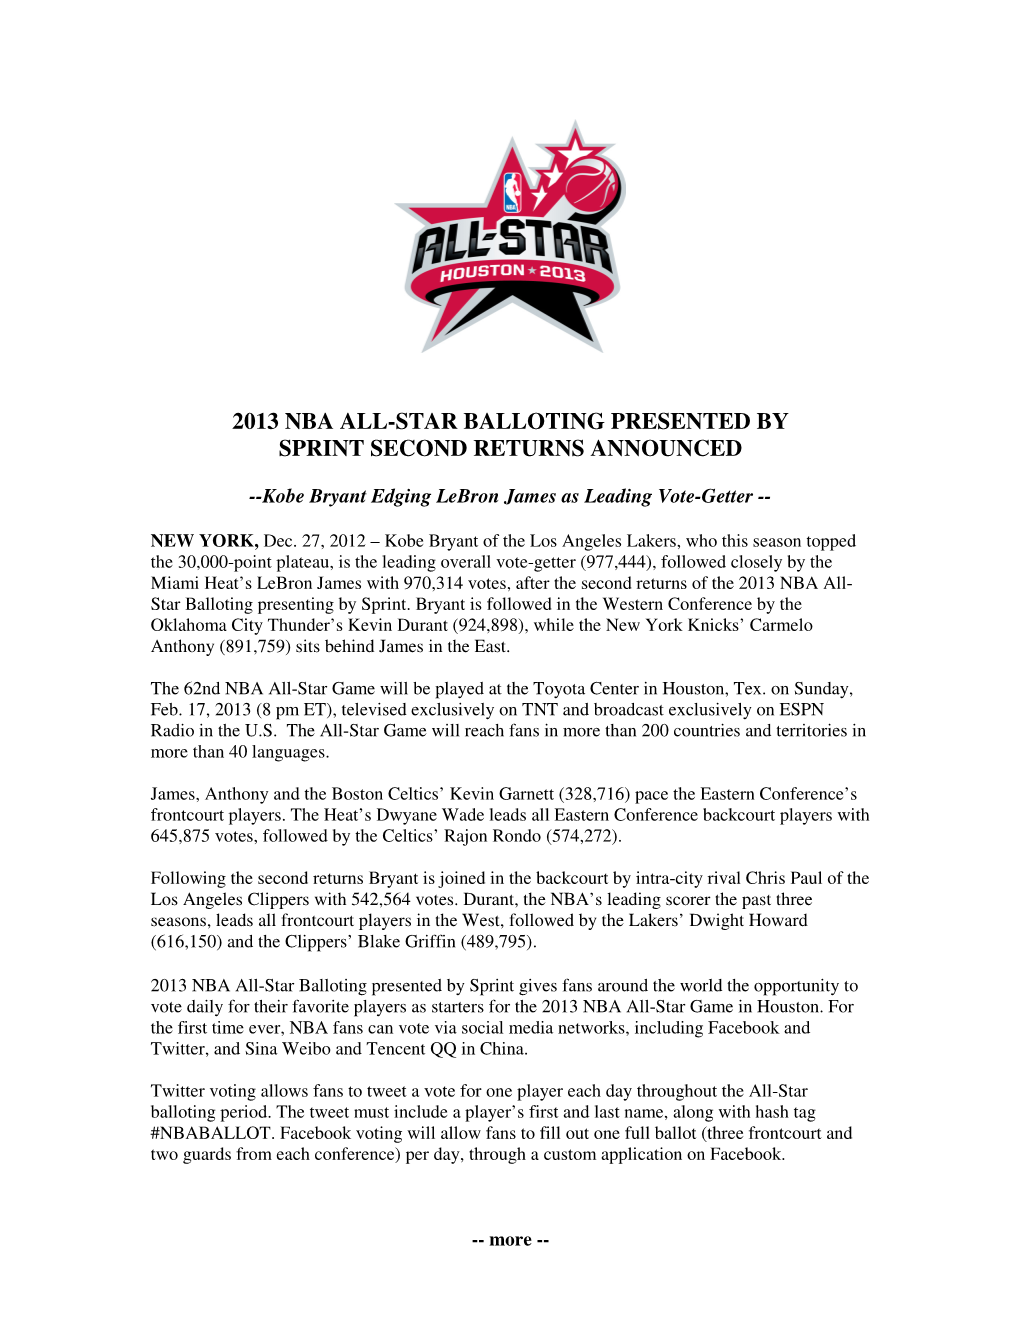 2013 Nba All-Star Balloting Presented by Sprint Second Returns Announced